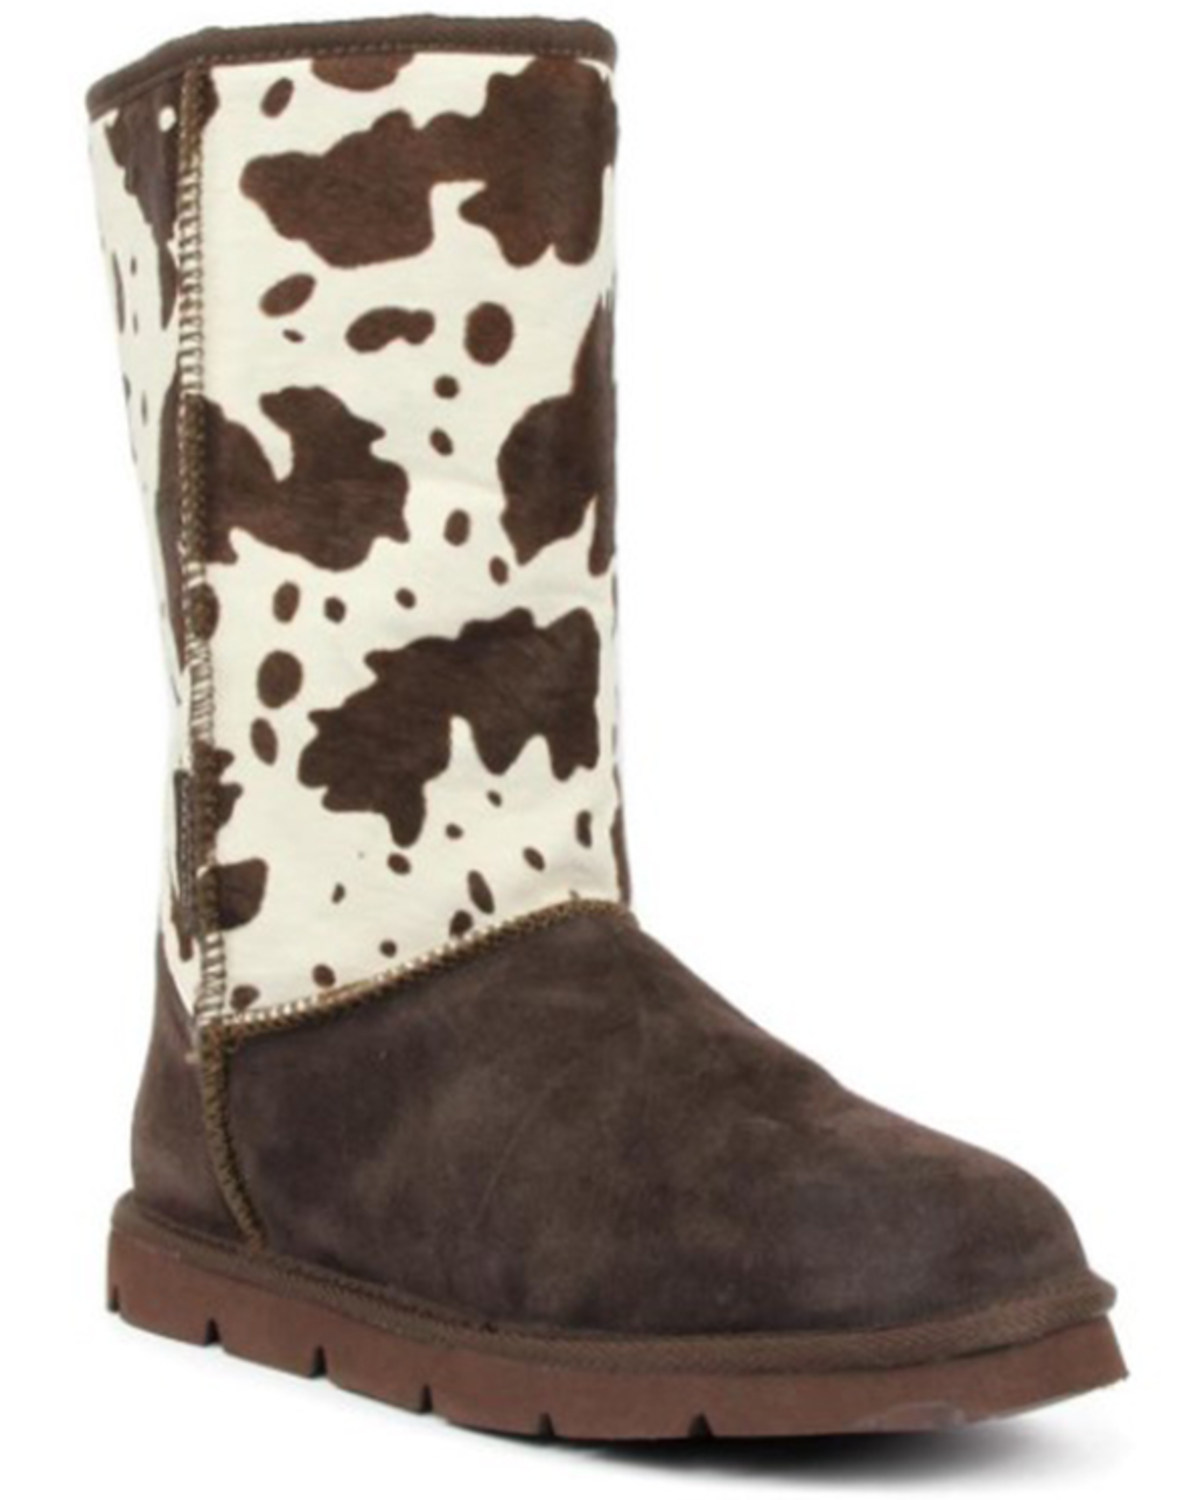 Superlamb Women's Turano 11" Cow Print Real Hair-On Casual Pull On Boots - Round Toe